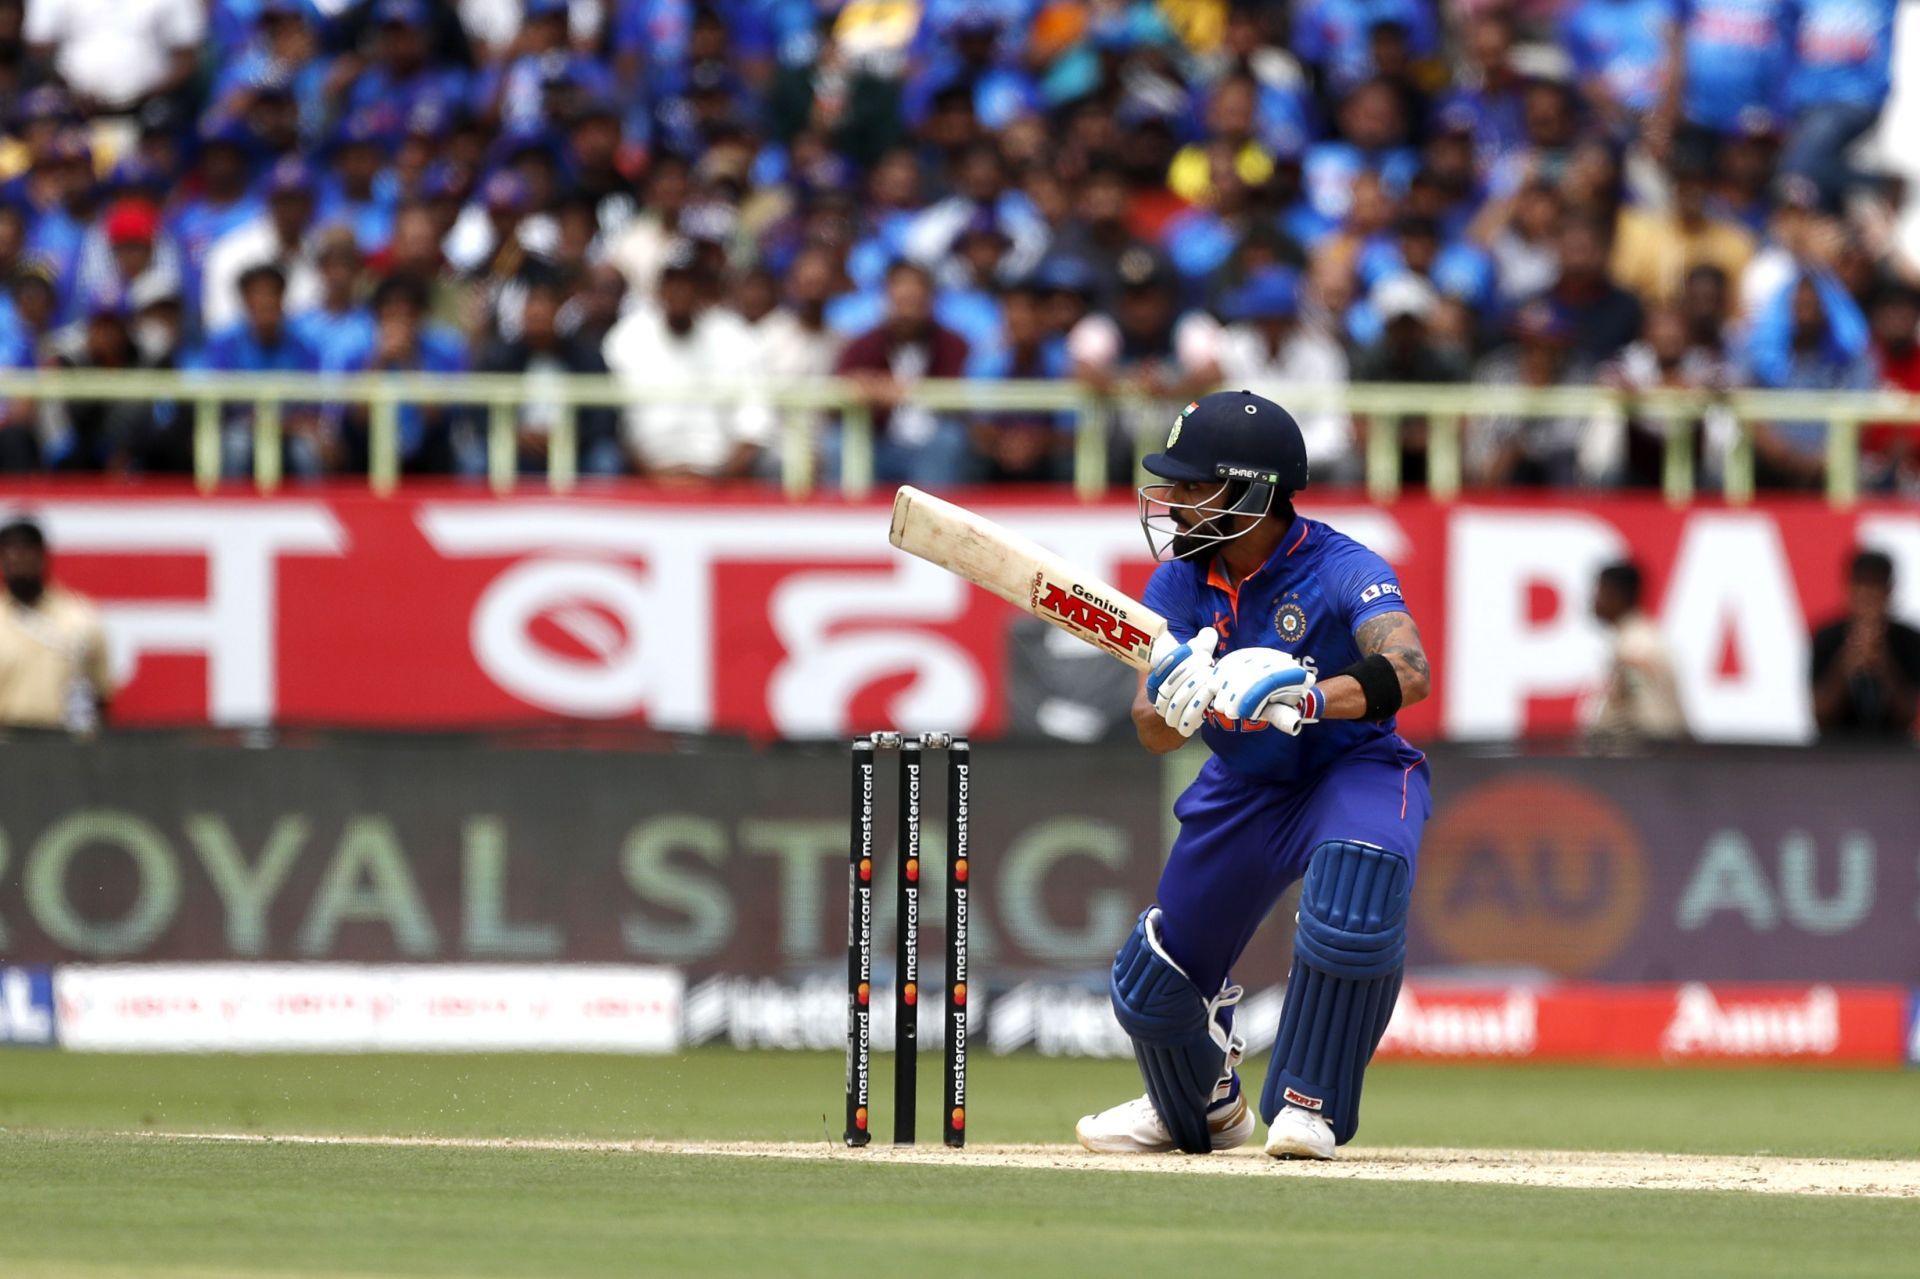 Virat Kohli showed glimpses of his best self in the second ODI, but was dismissed for 31